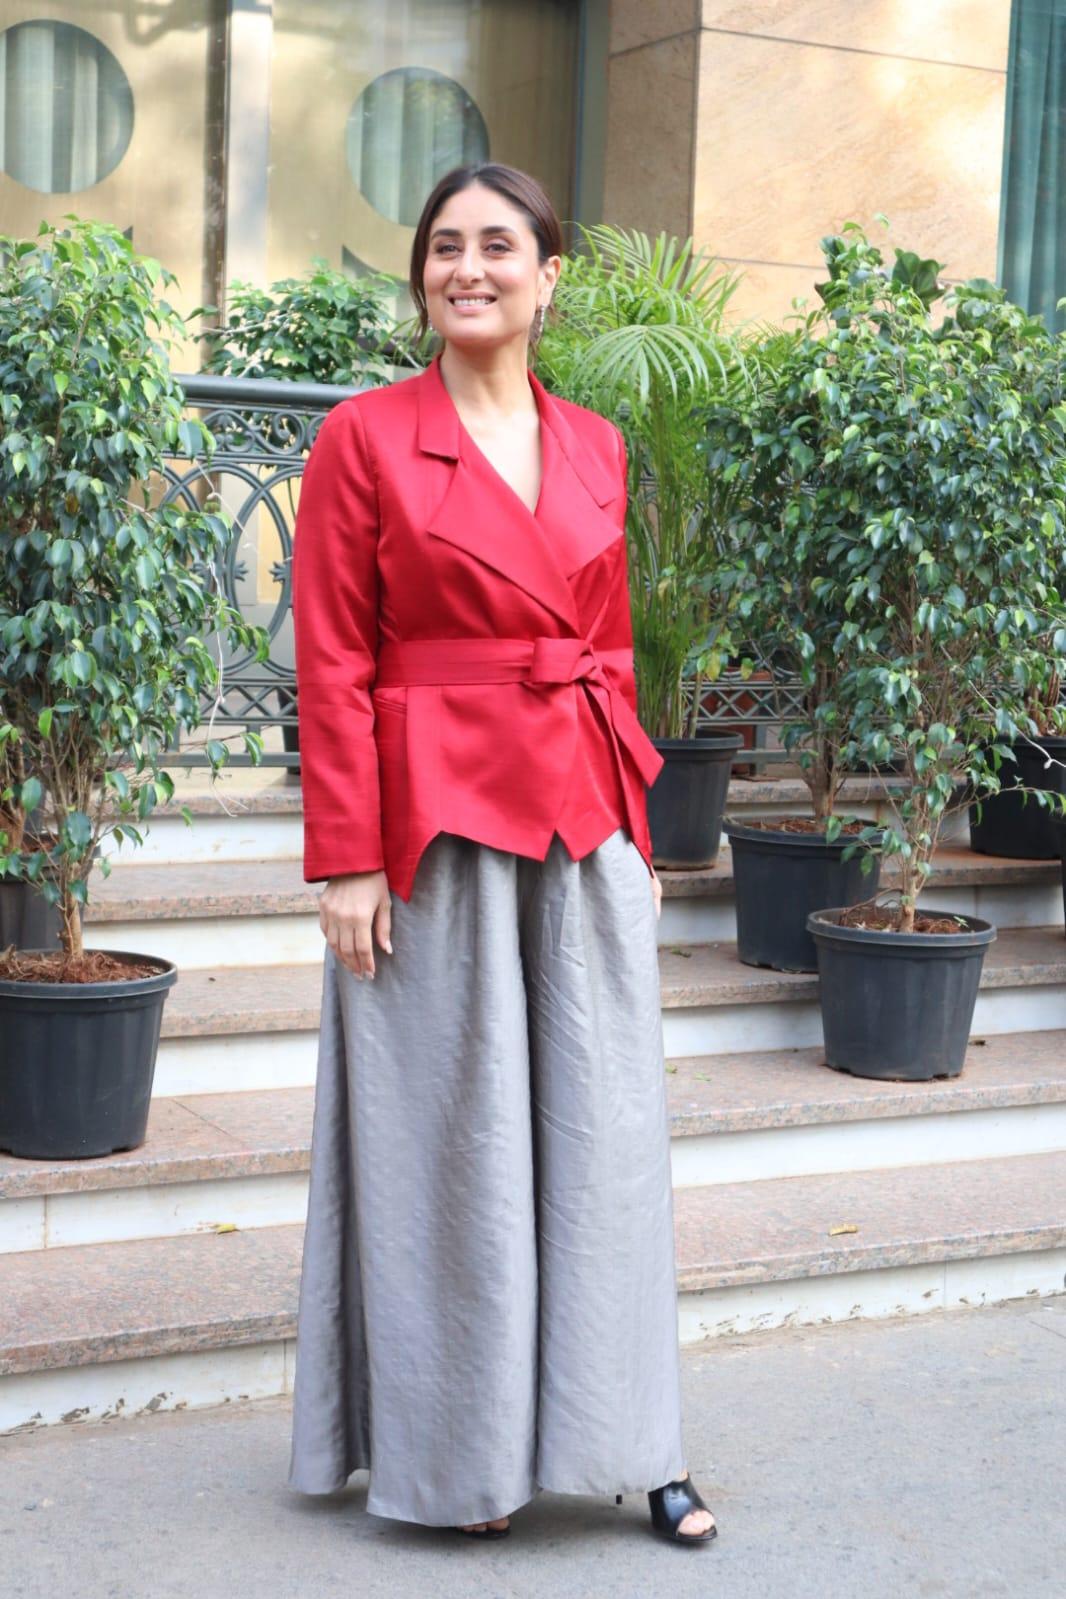 Kareena Kapoor wore a beautiful red top and paired it with a grey log skirt as she was clicked in the city